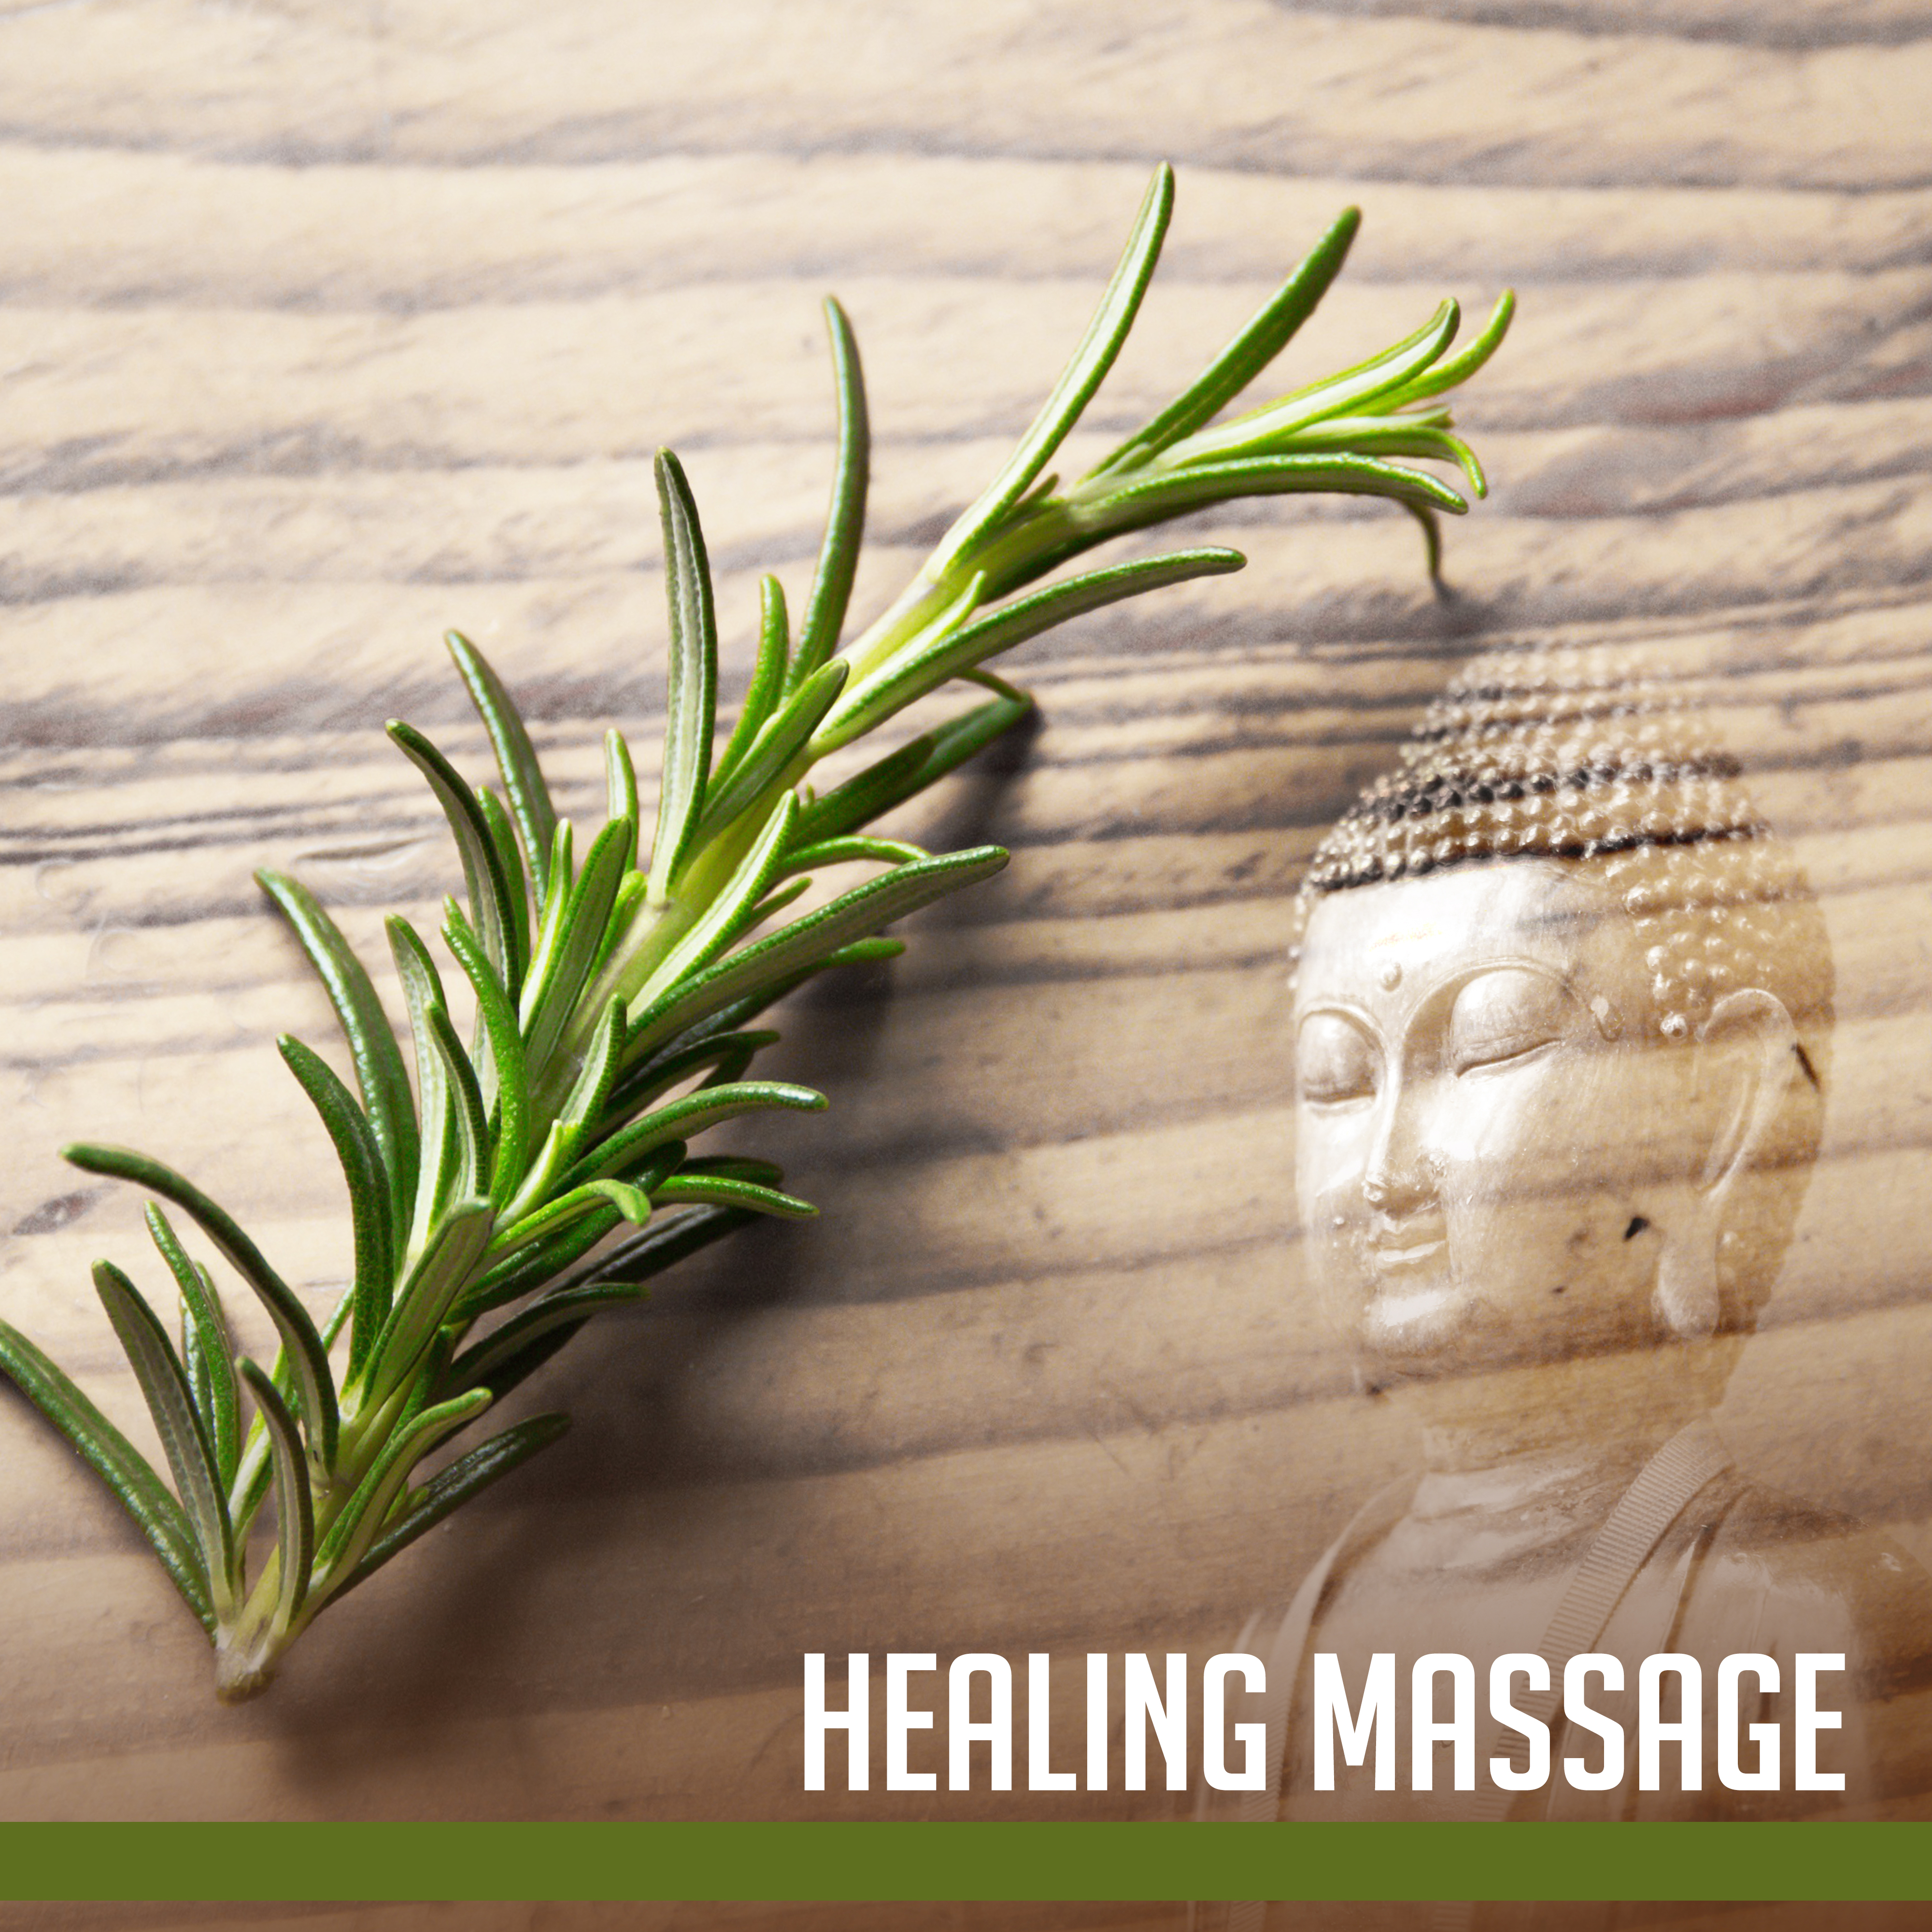 Healing Massage  Relaxing Spa Time, Hot Stone Massage, Relax for Your Body, Spirit Rest